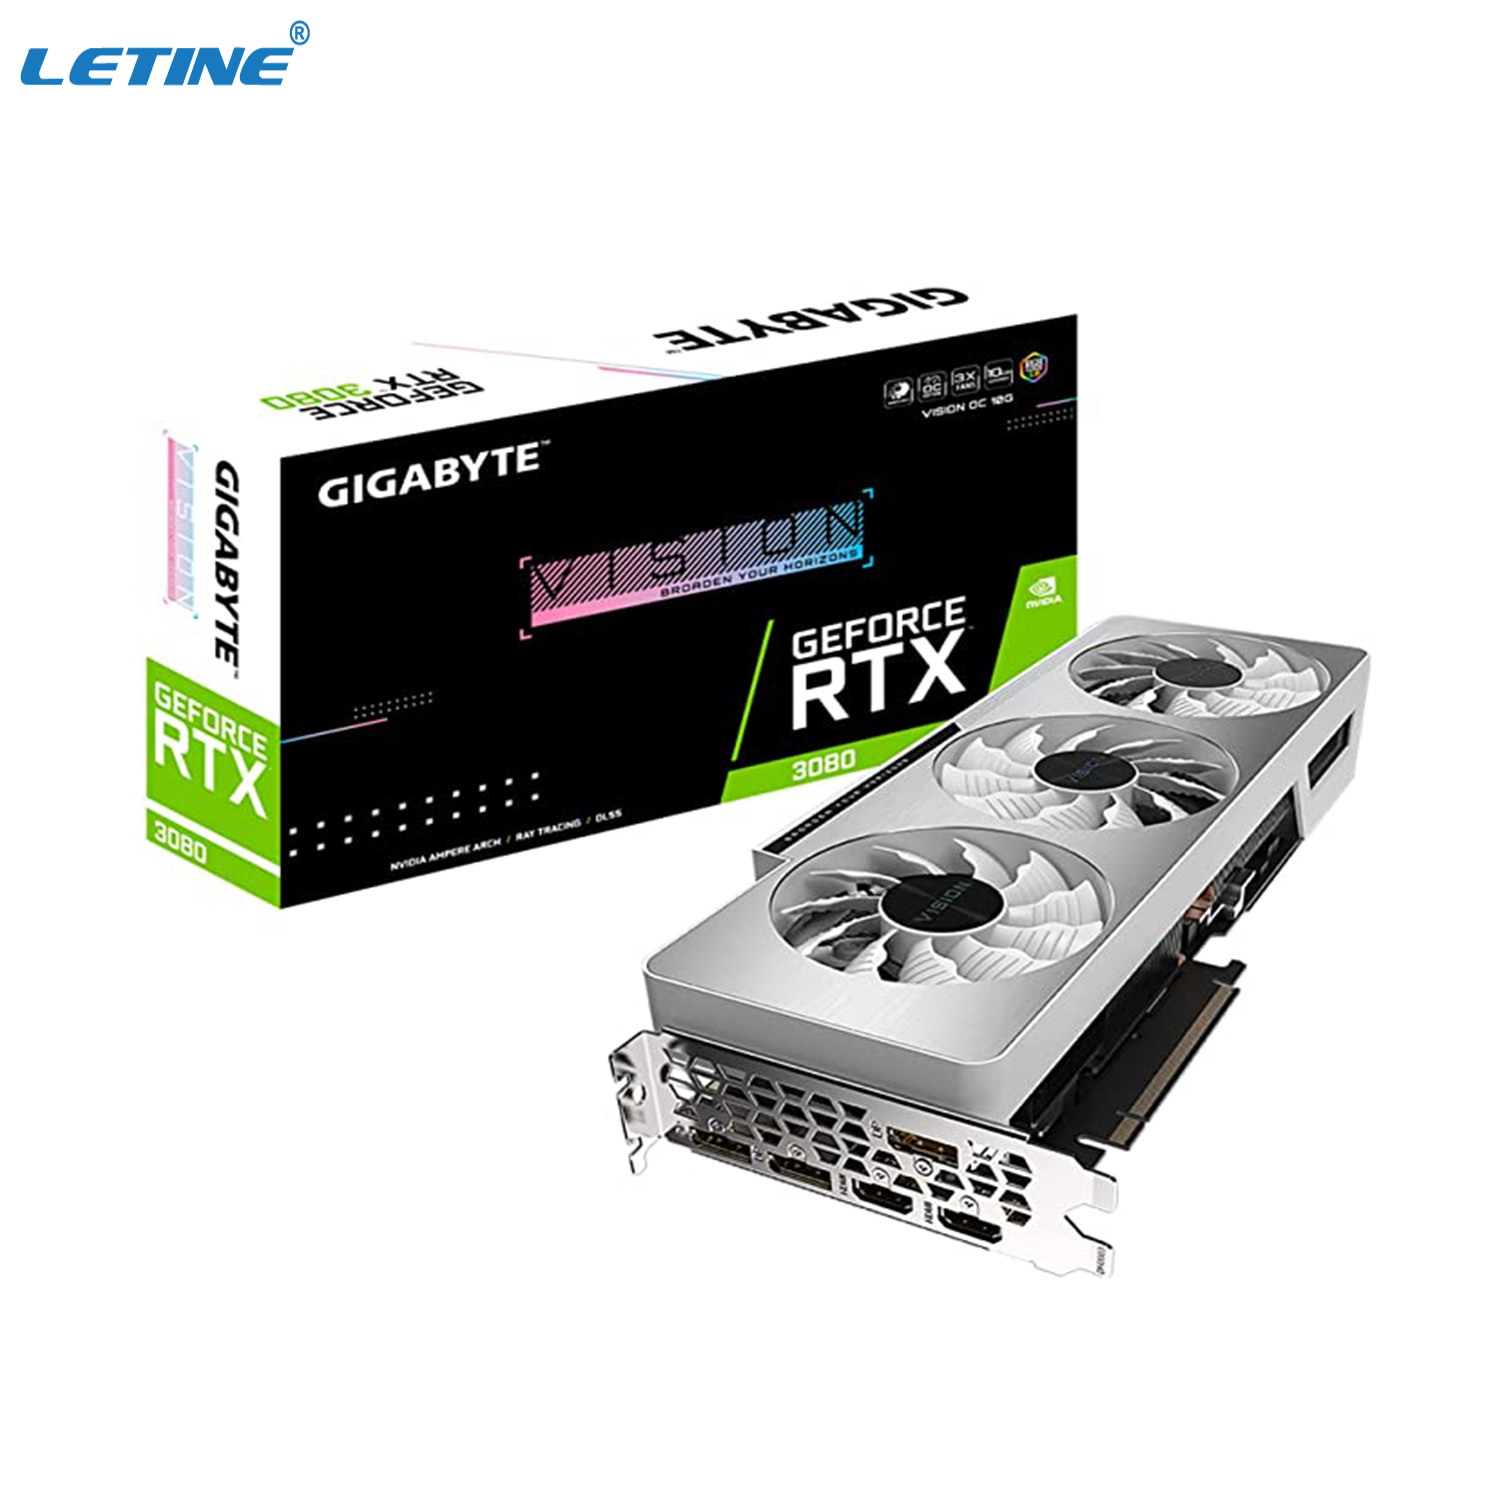 China LHR Nvidia Graphic Card Gigabyte GeForce RTX 3080 VISION OC 10G graphic cards for gaming factory